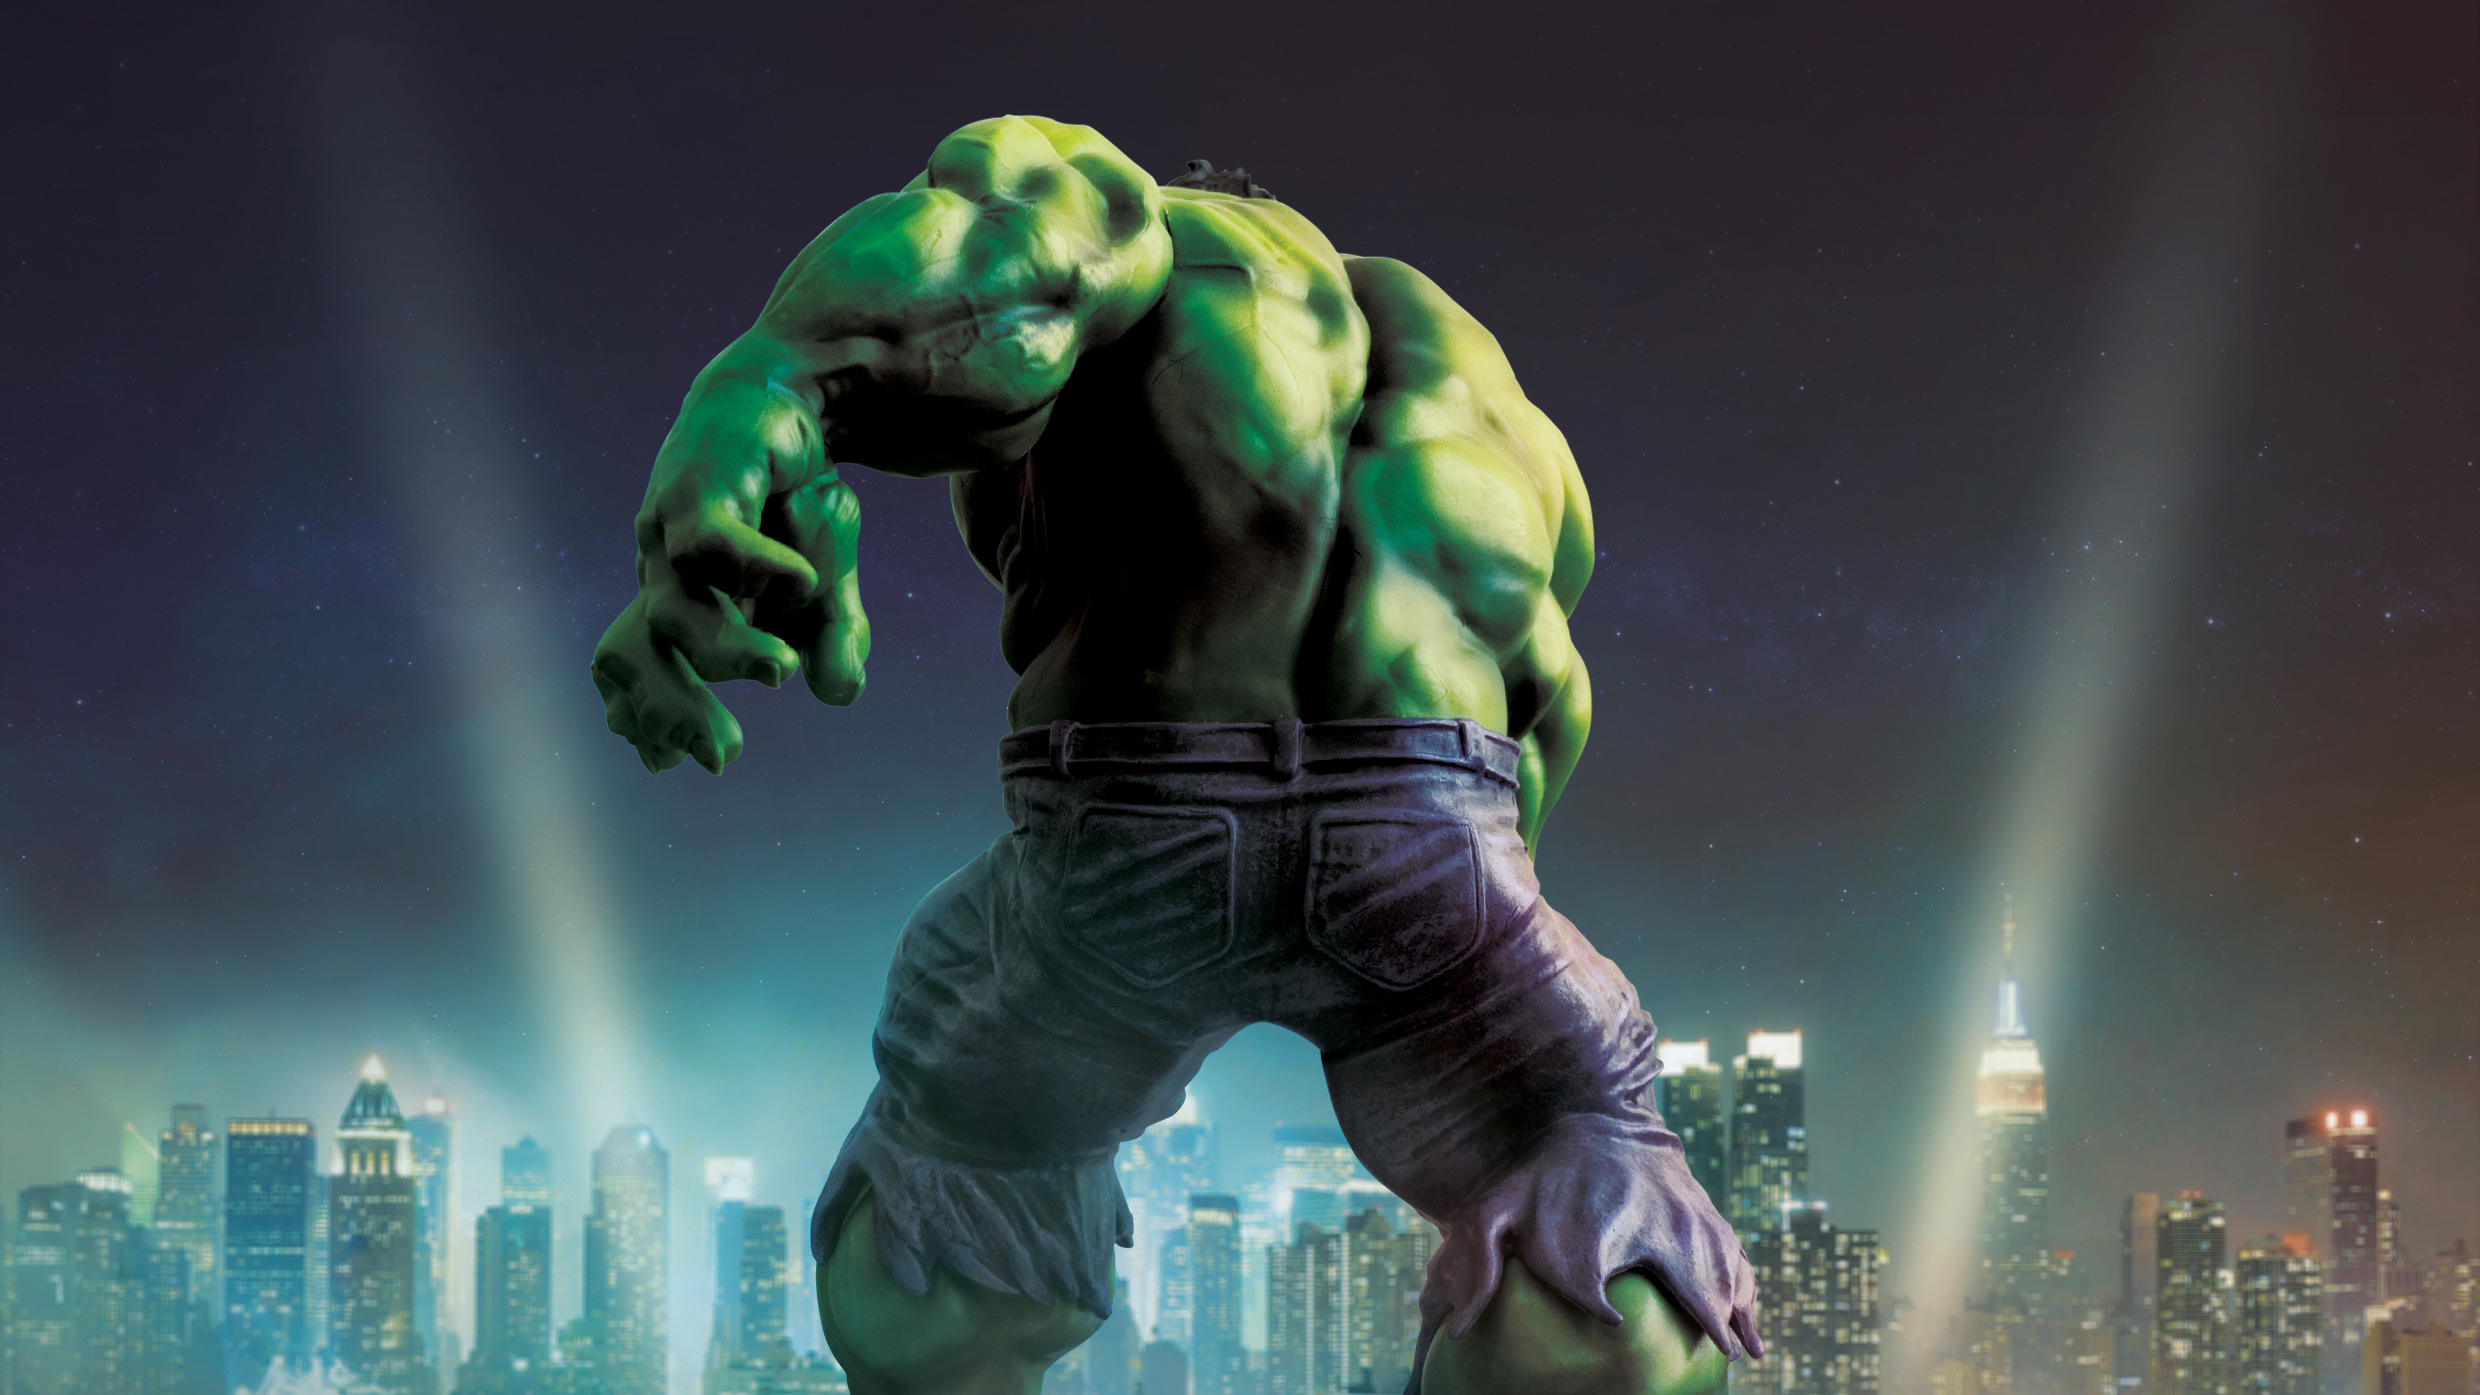 1440x900 Hulk Art Hd 1440x900 Resolution Hd 4k Wallpapers Images Backgrounds Photos And Pictures